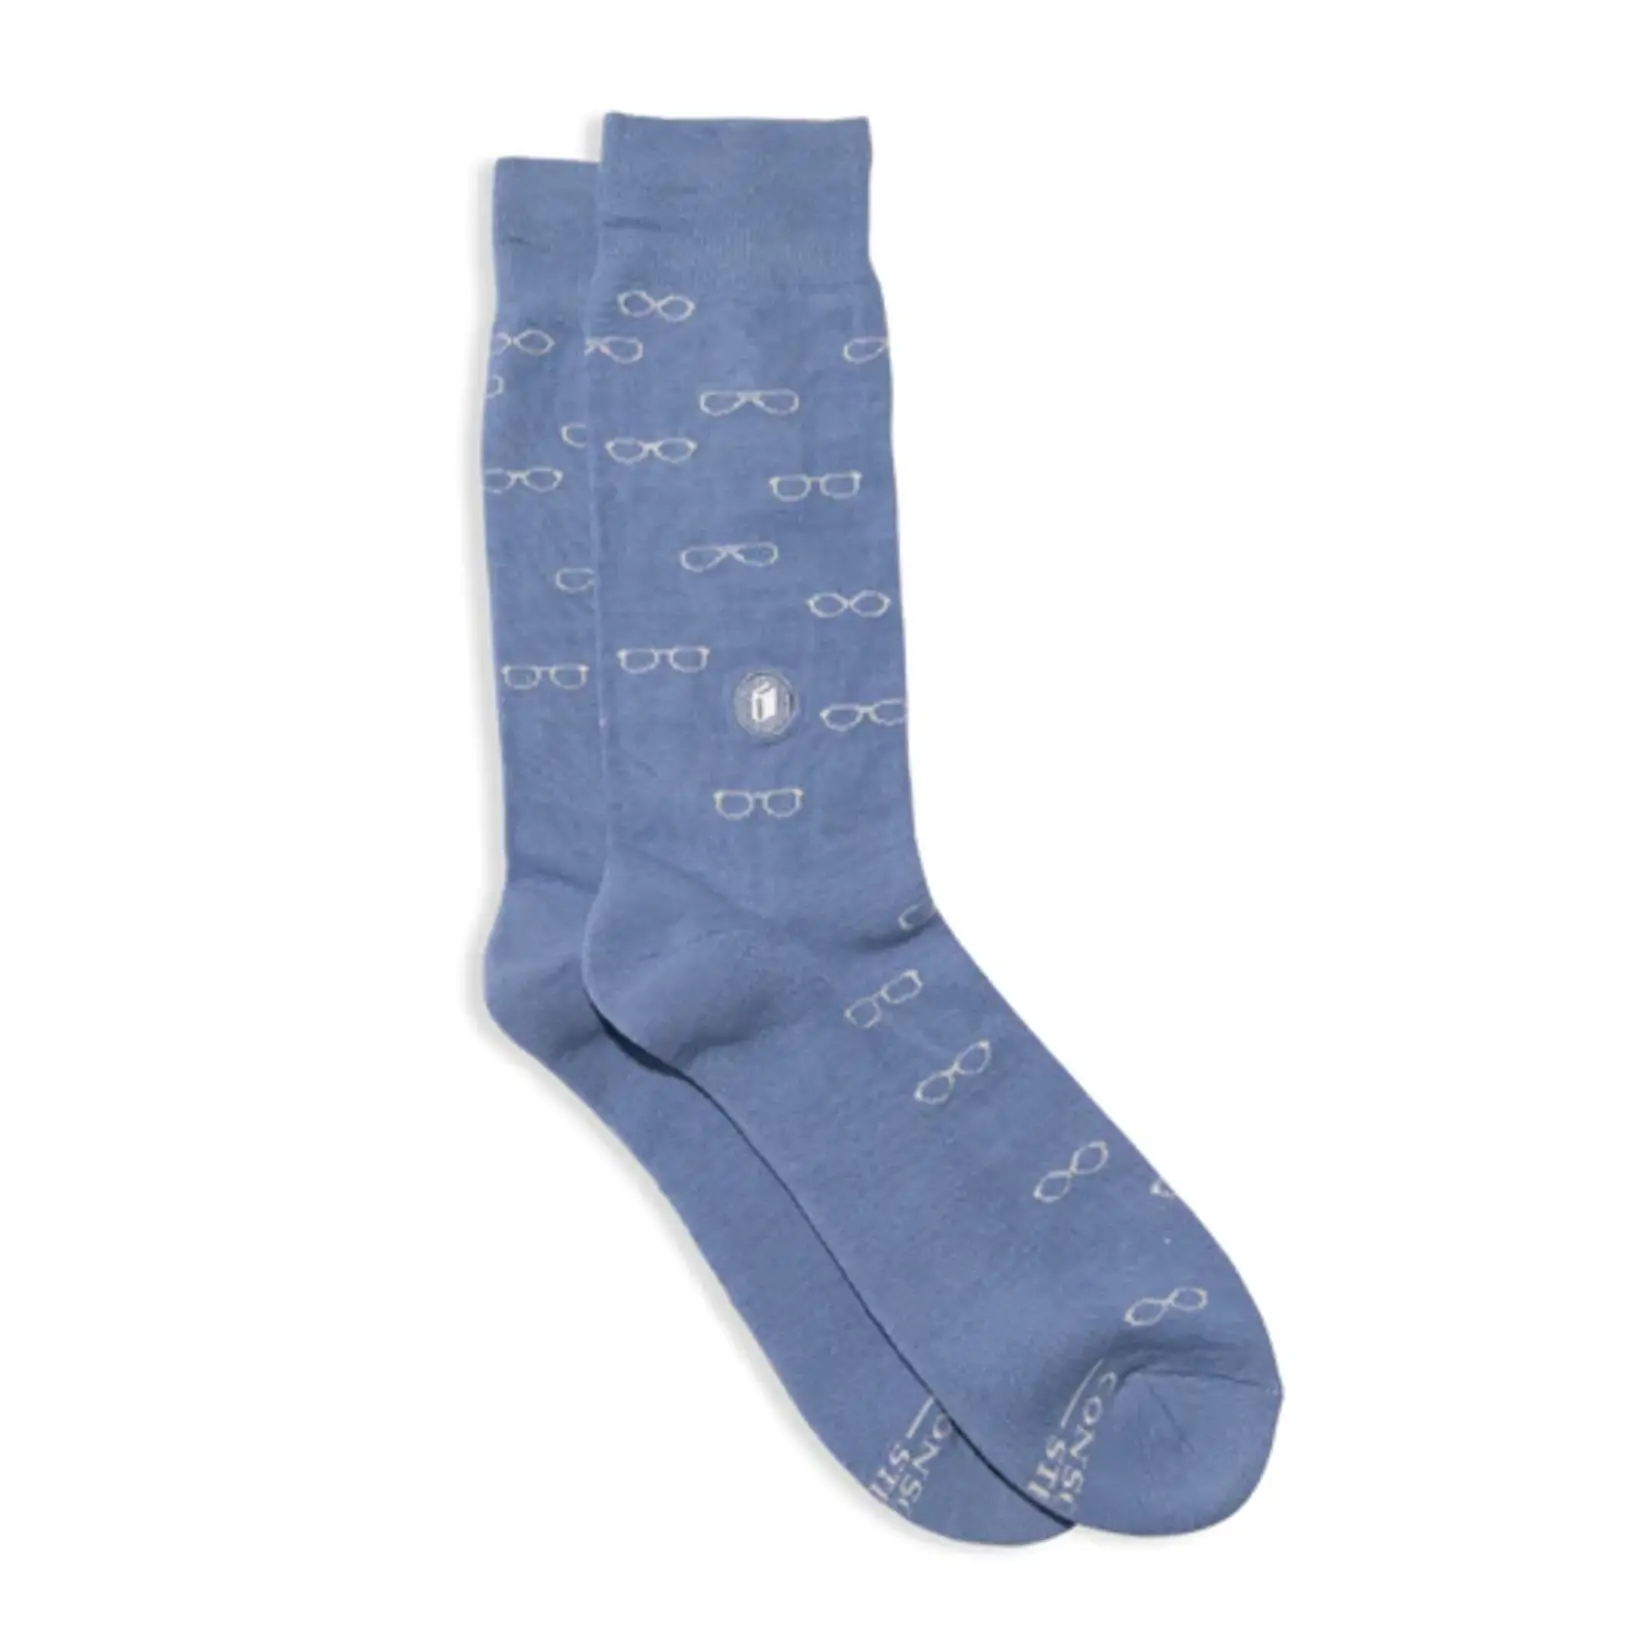 Conscious Step Socks that Give Books | Small | Blue